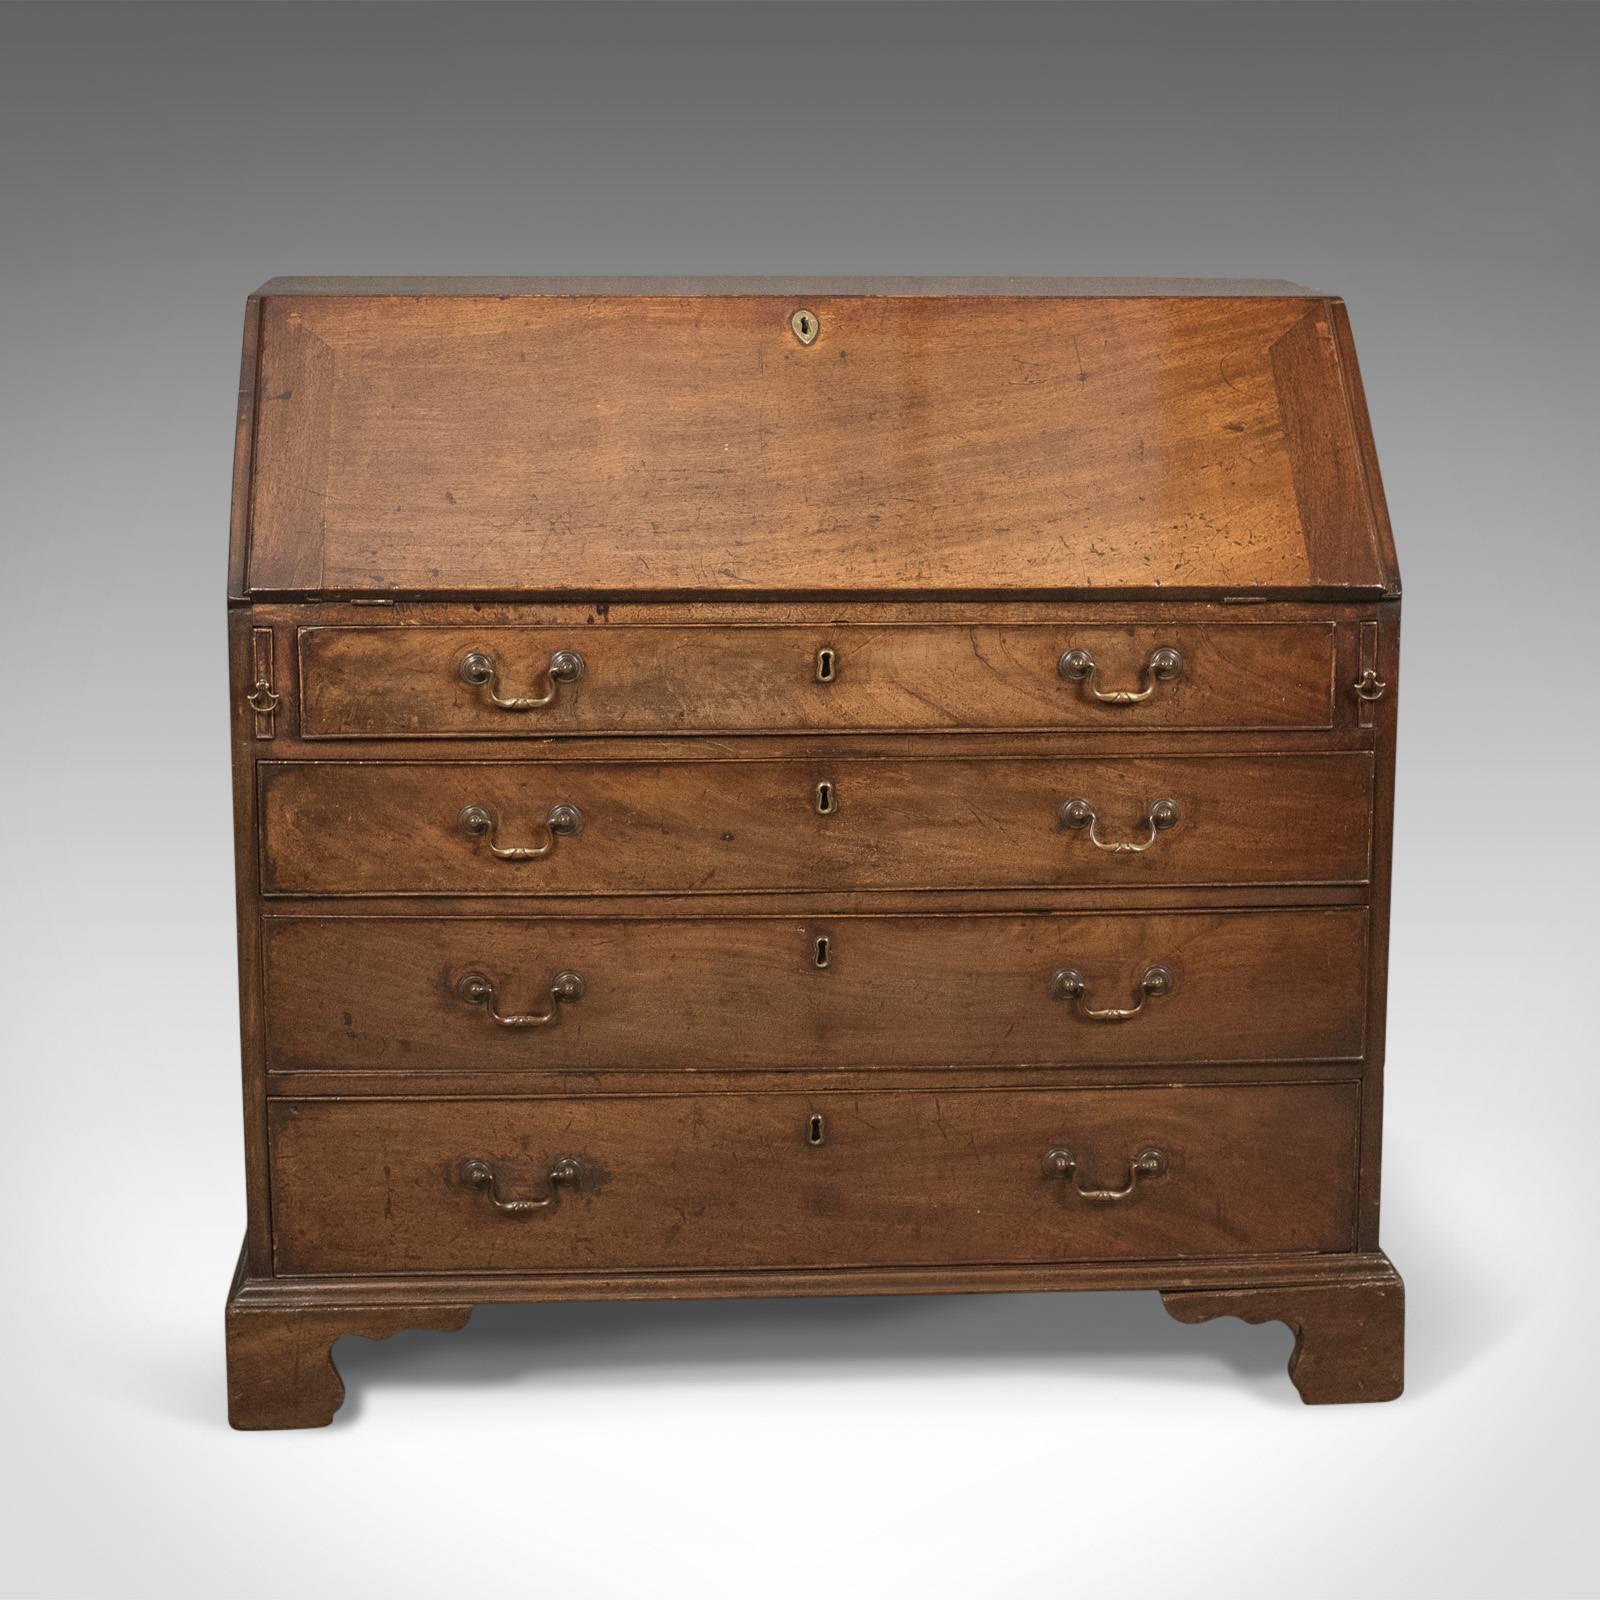 This is a Georgian antique bureau, an 18th century mahogany desk dating to the reign of George III, circa 1770.

Mahogany with russet tones, grain interest and a desirable aged patina
Key and working lock to the fall, drawer key absent
Raised on